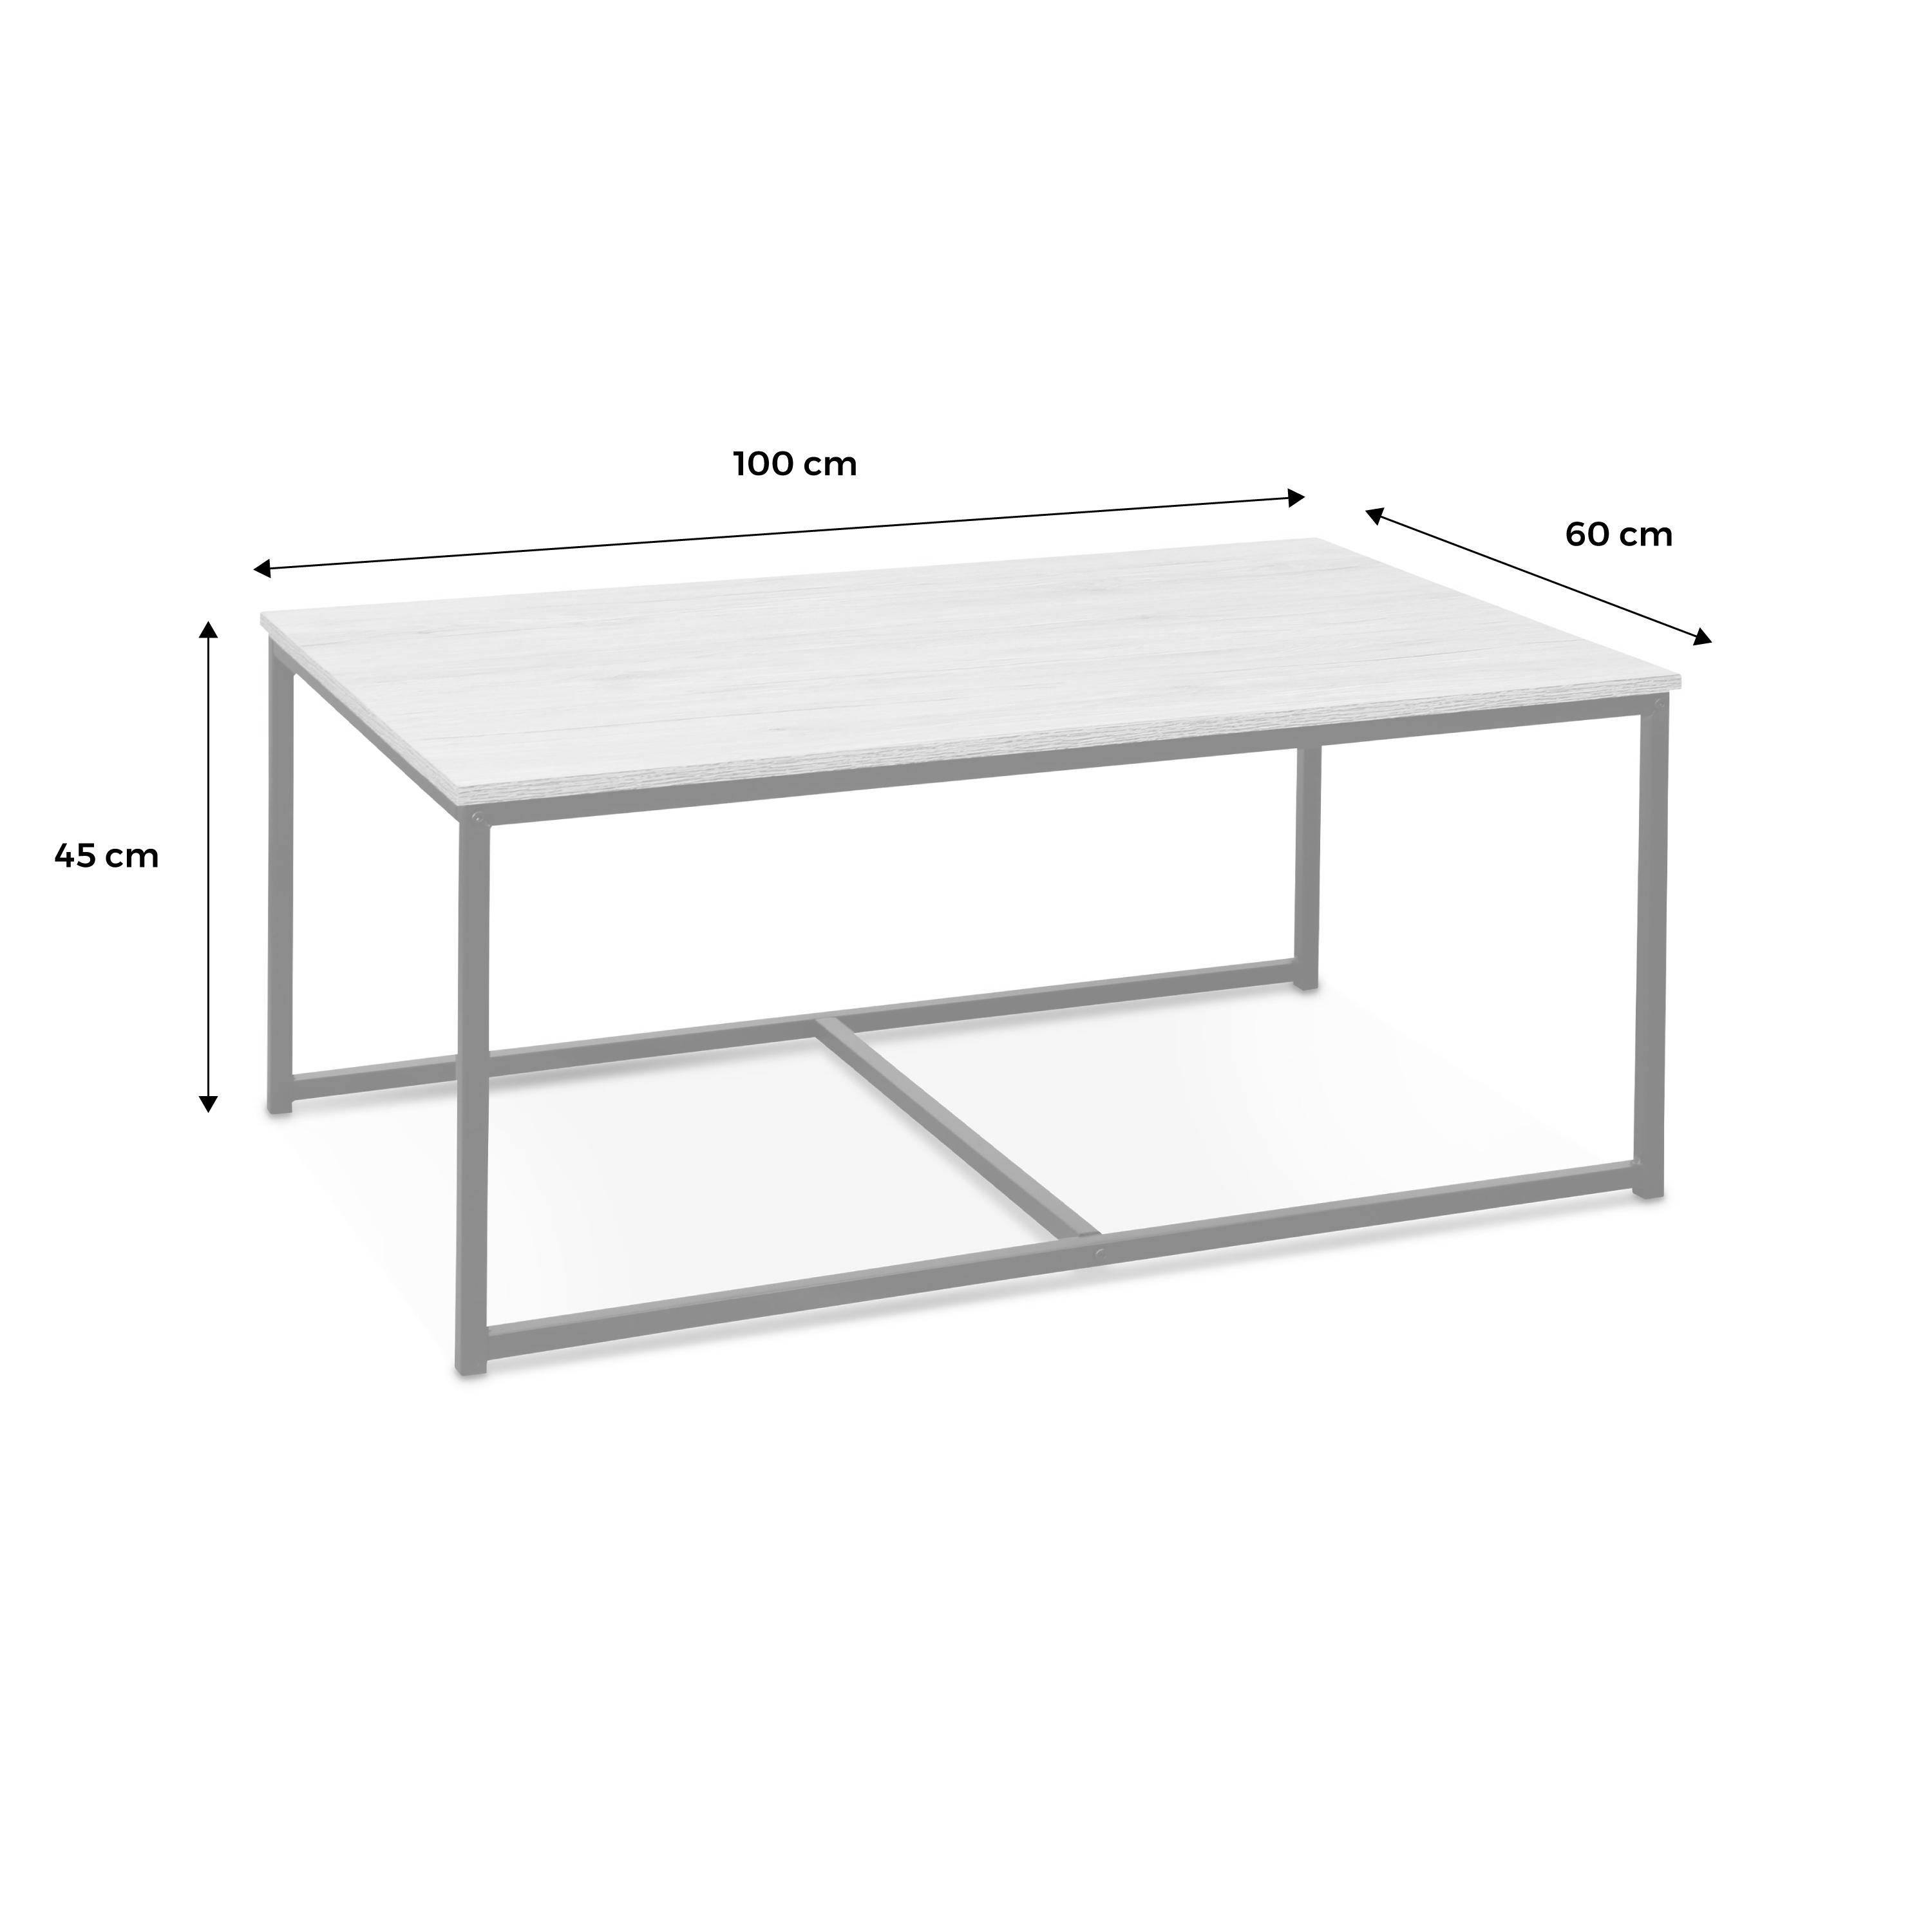 Set of 3 metal and wood-effect nesting tables, large table 100x60x45cm, 2x small tables 50x50x38cm - Loft - Black Photo10